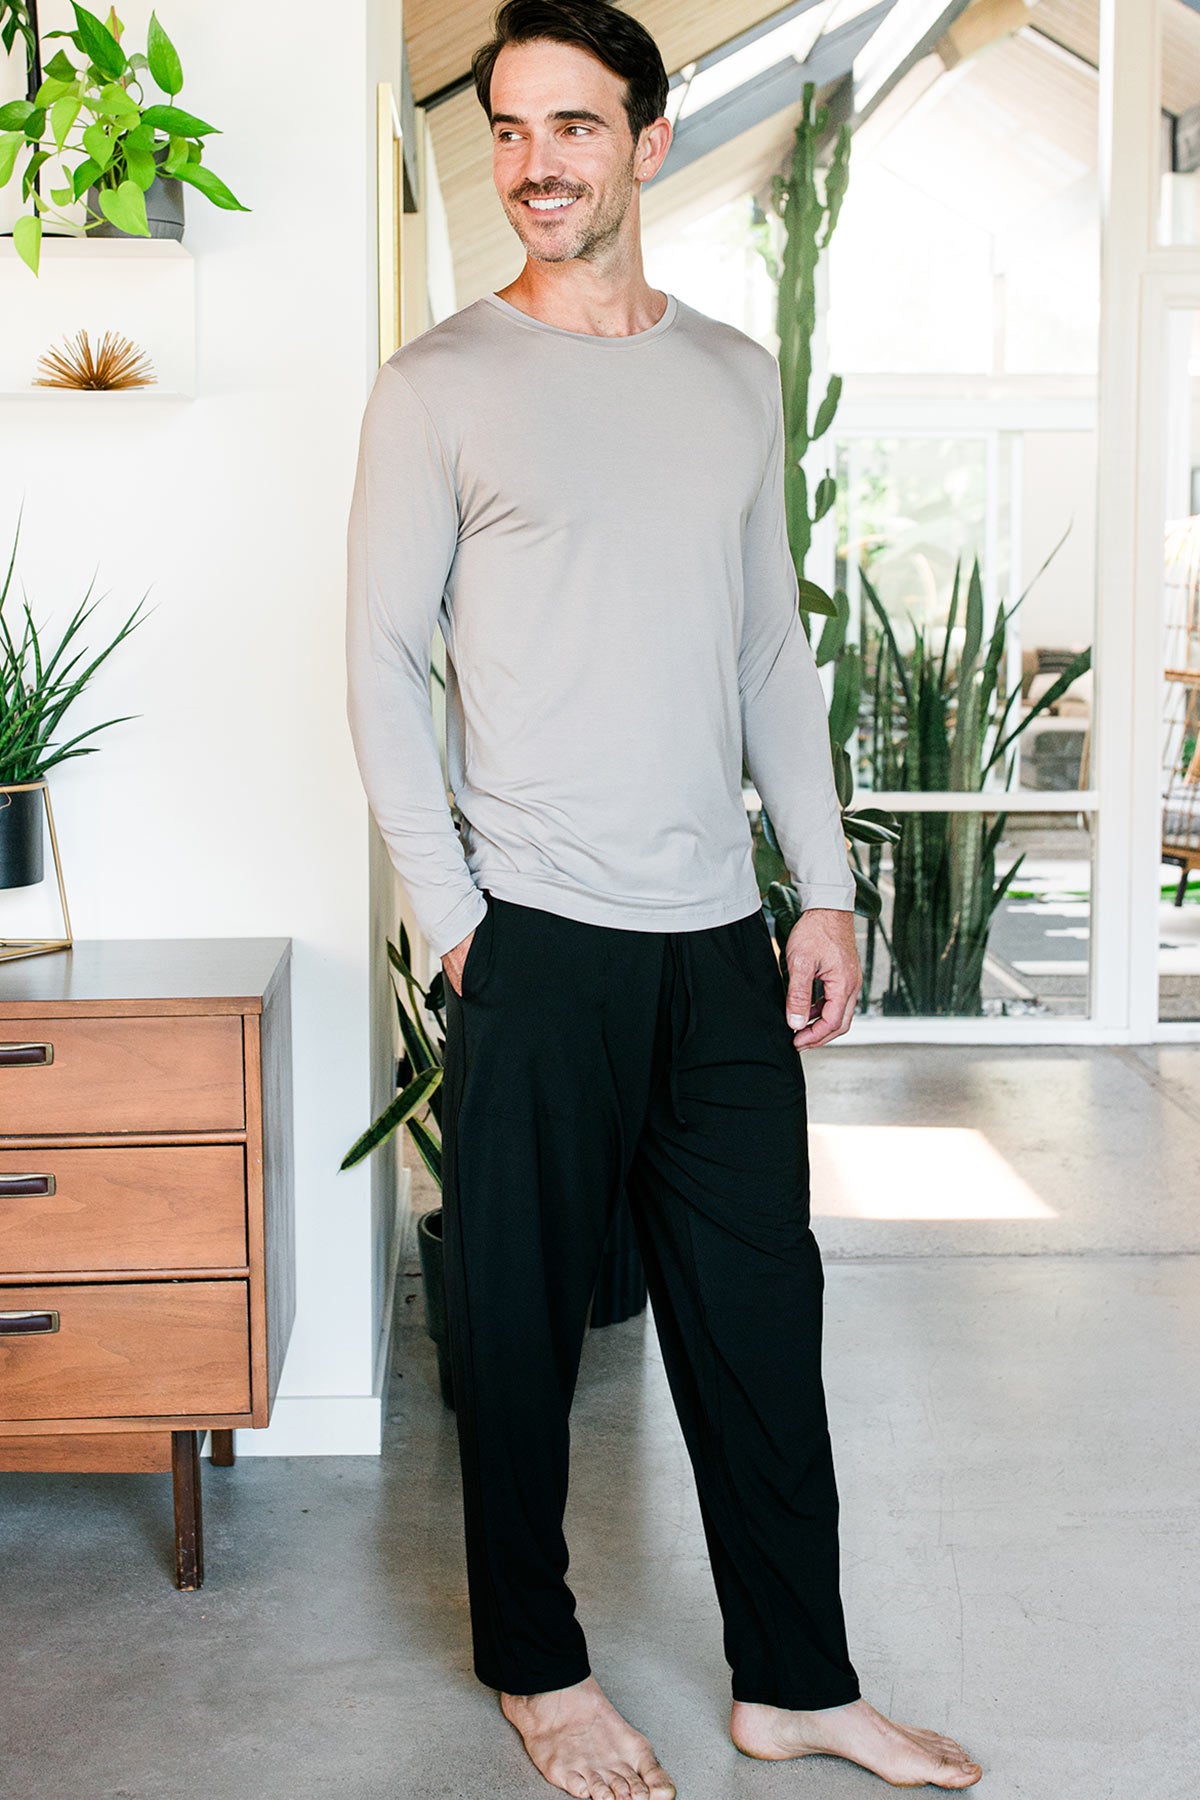 A man standing and smiling with one hand in his pocket, wearing Yala Men's Hayden ButterSoft Bamboo Lounge Pants in Black